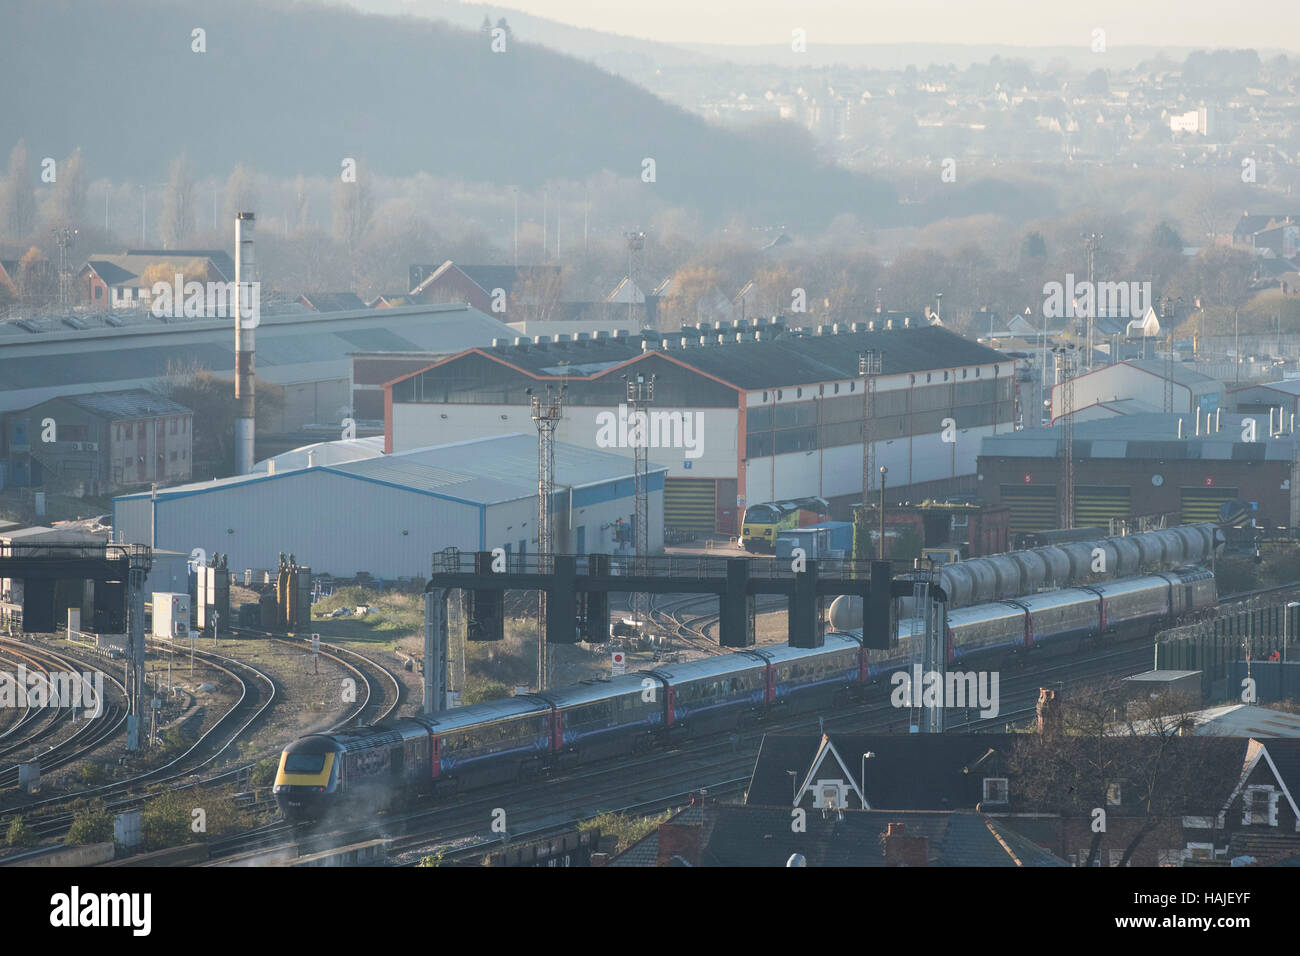 Arriva Trains Canton Train depot in Canton, South Wales, Cardiff, Wales, UK Stock Photo